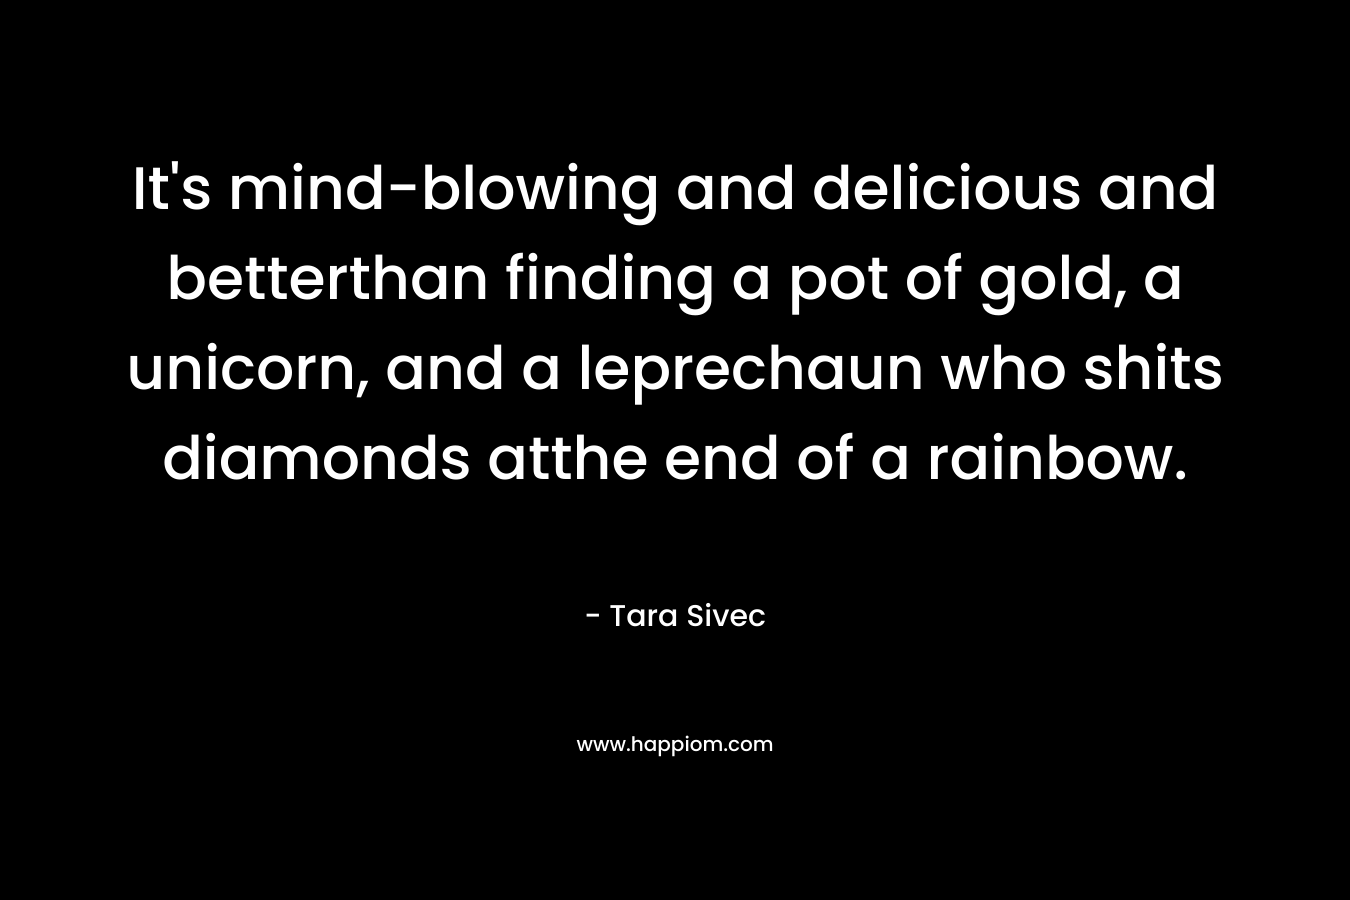 It’s mind-blowing and delicious and betterthan finding a pot of gold, a unicorn, and a leprechaun who shits diamonds atthe end of a rainbow. – Tara Sivec